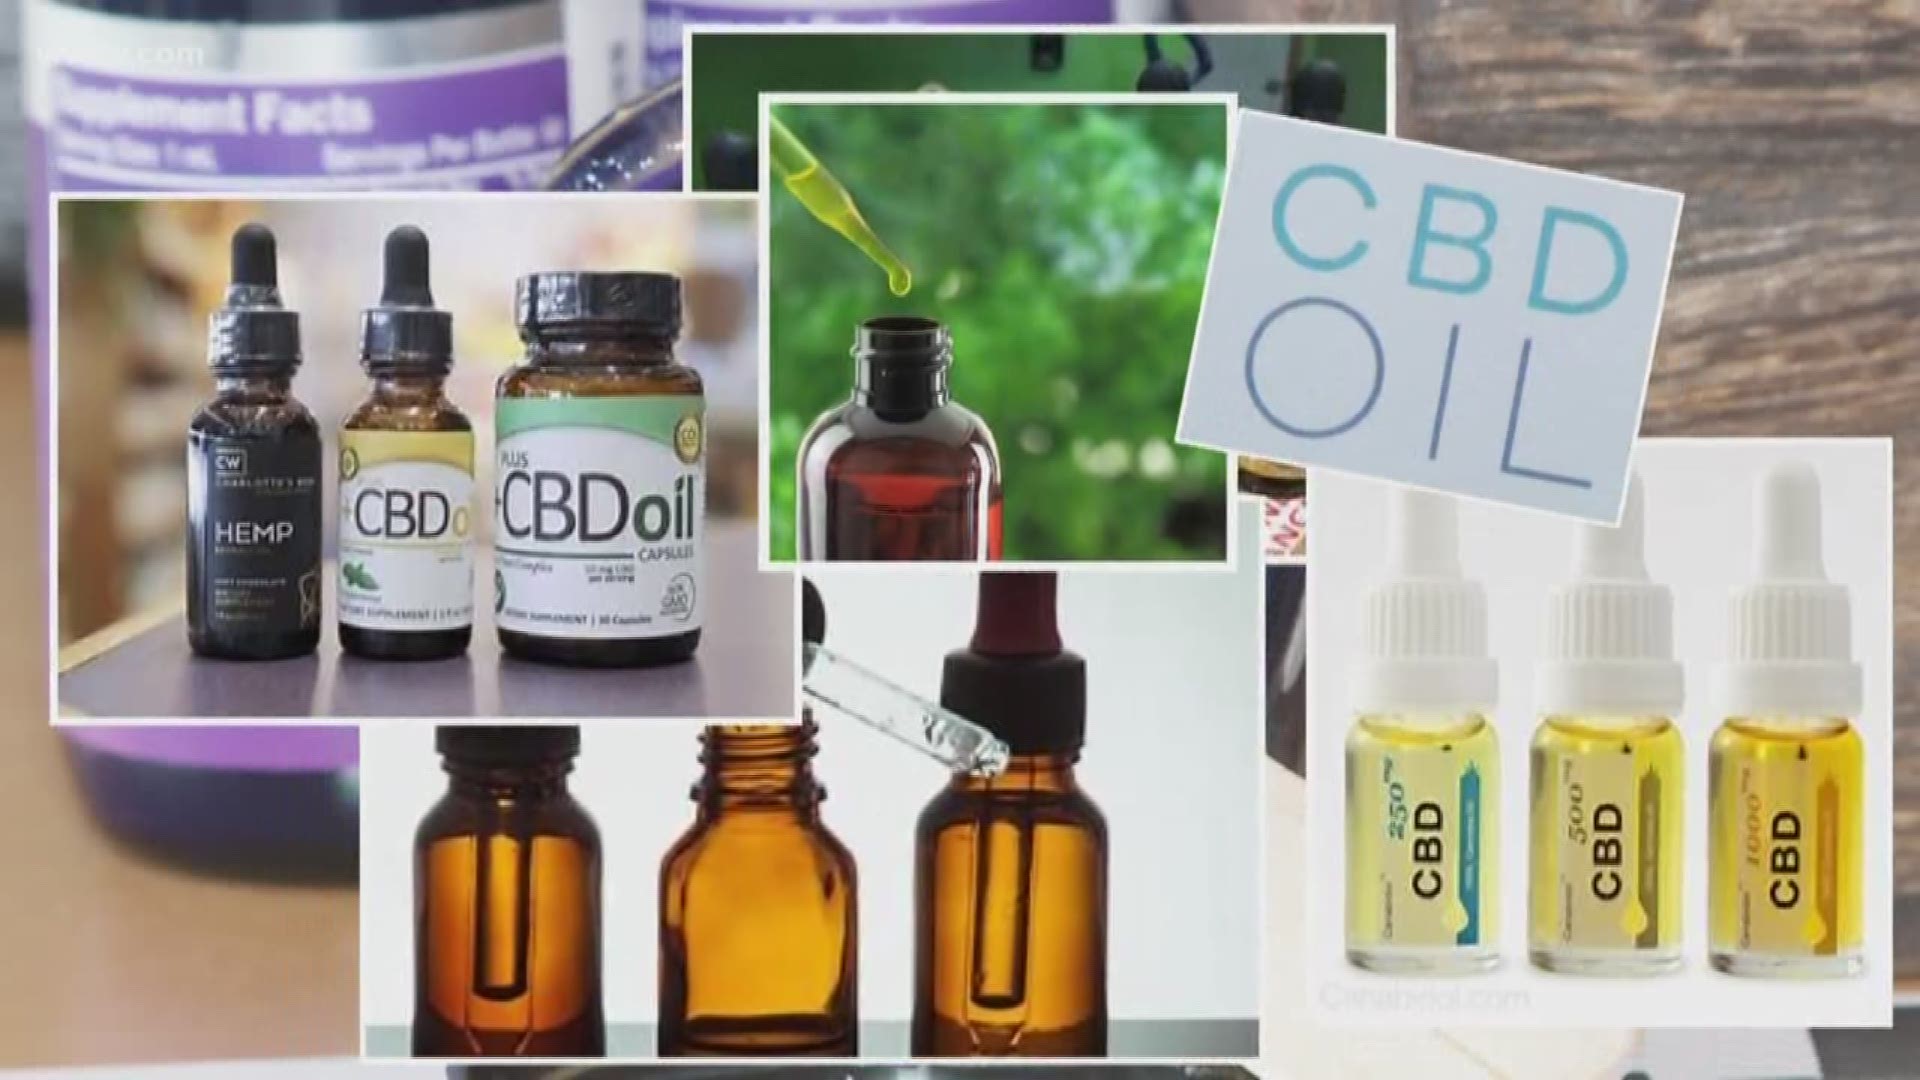 From billboards around the city to new retailers popping up, there is a sudden increase in people buying and selling something called CBD oil.
Some say it's life-changing miracle medicine. Others are unclear if they are really buying liquid marijuana.